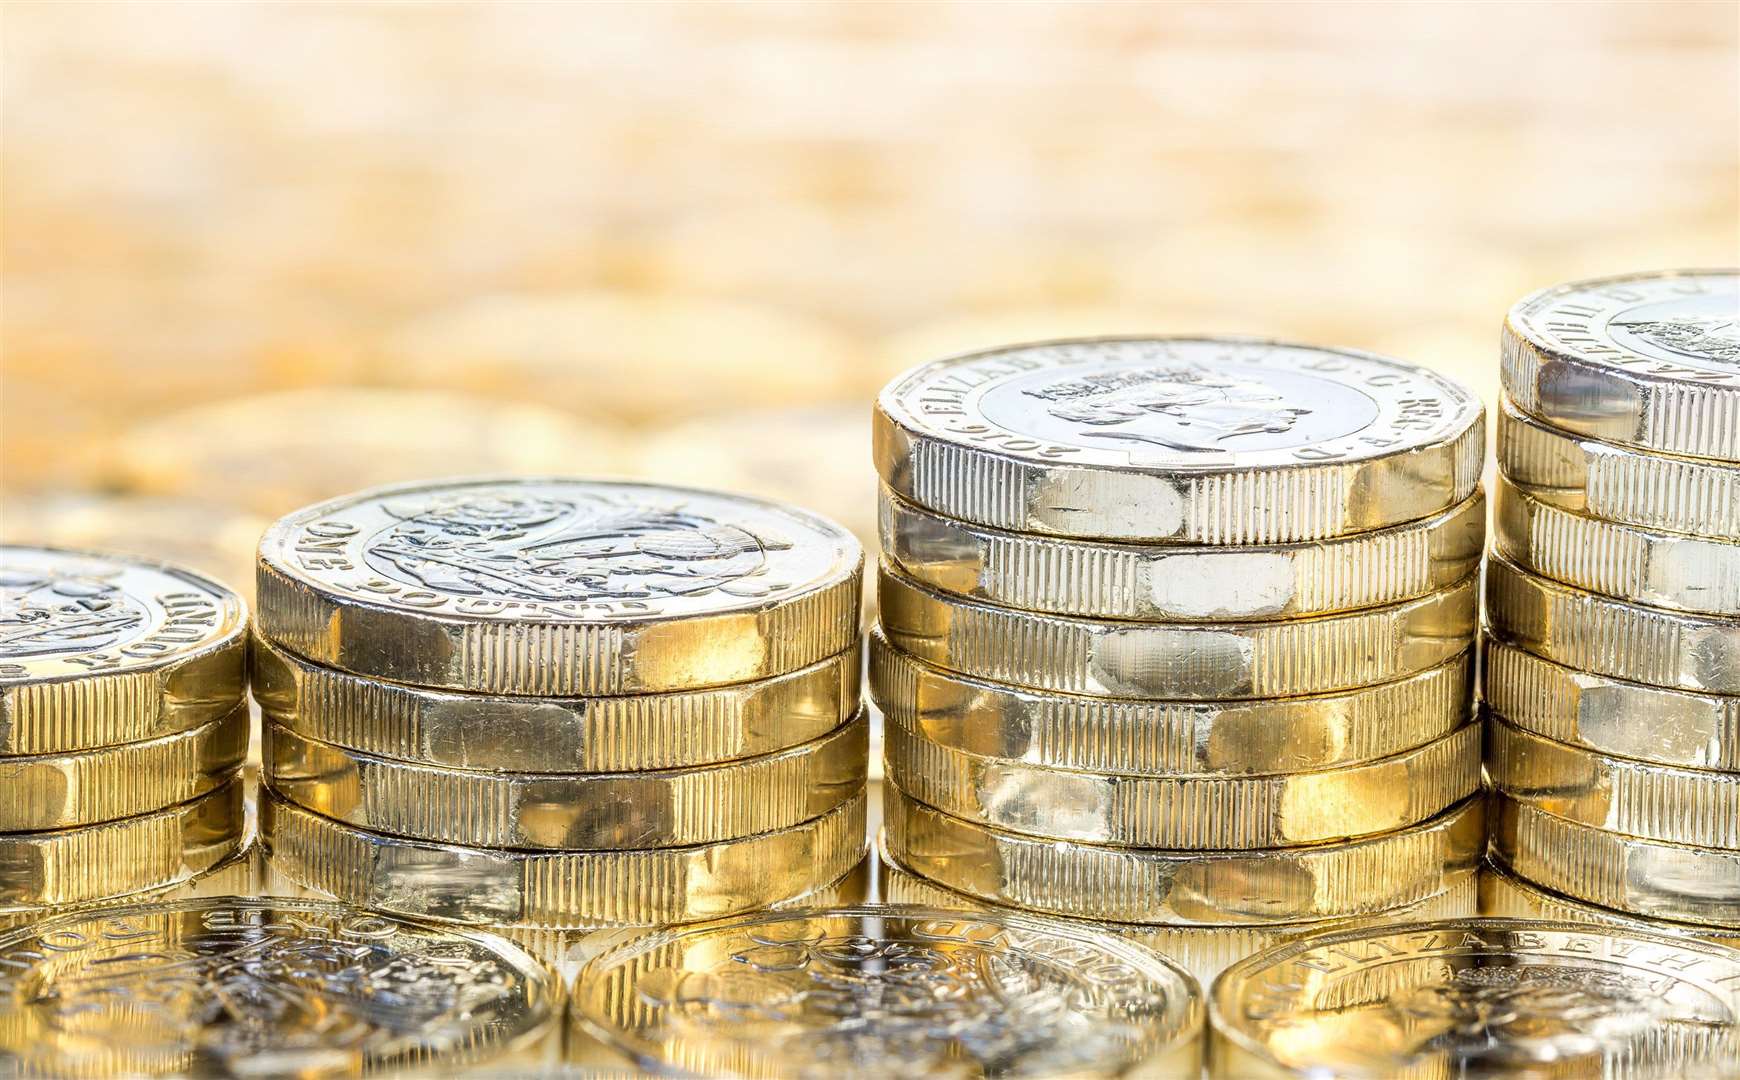 Top earners in Kent take home an average of £42,000 more per year than their lower-paid counterparts according to the Office for National Statistics